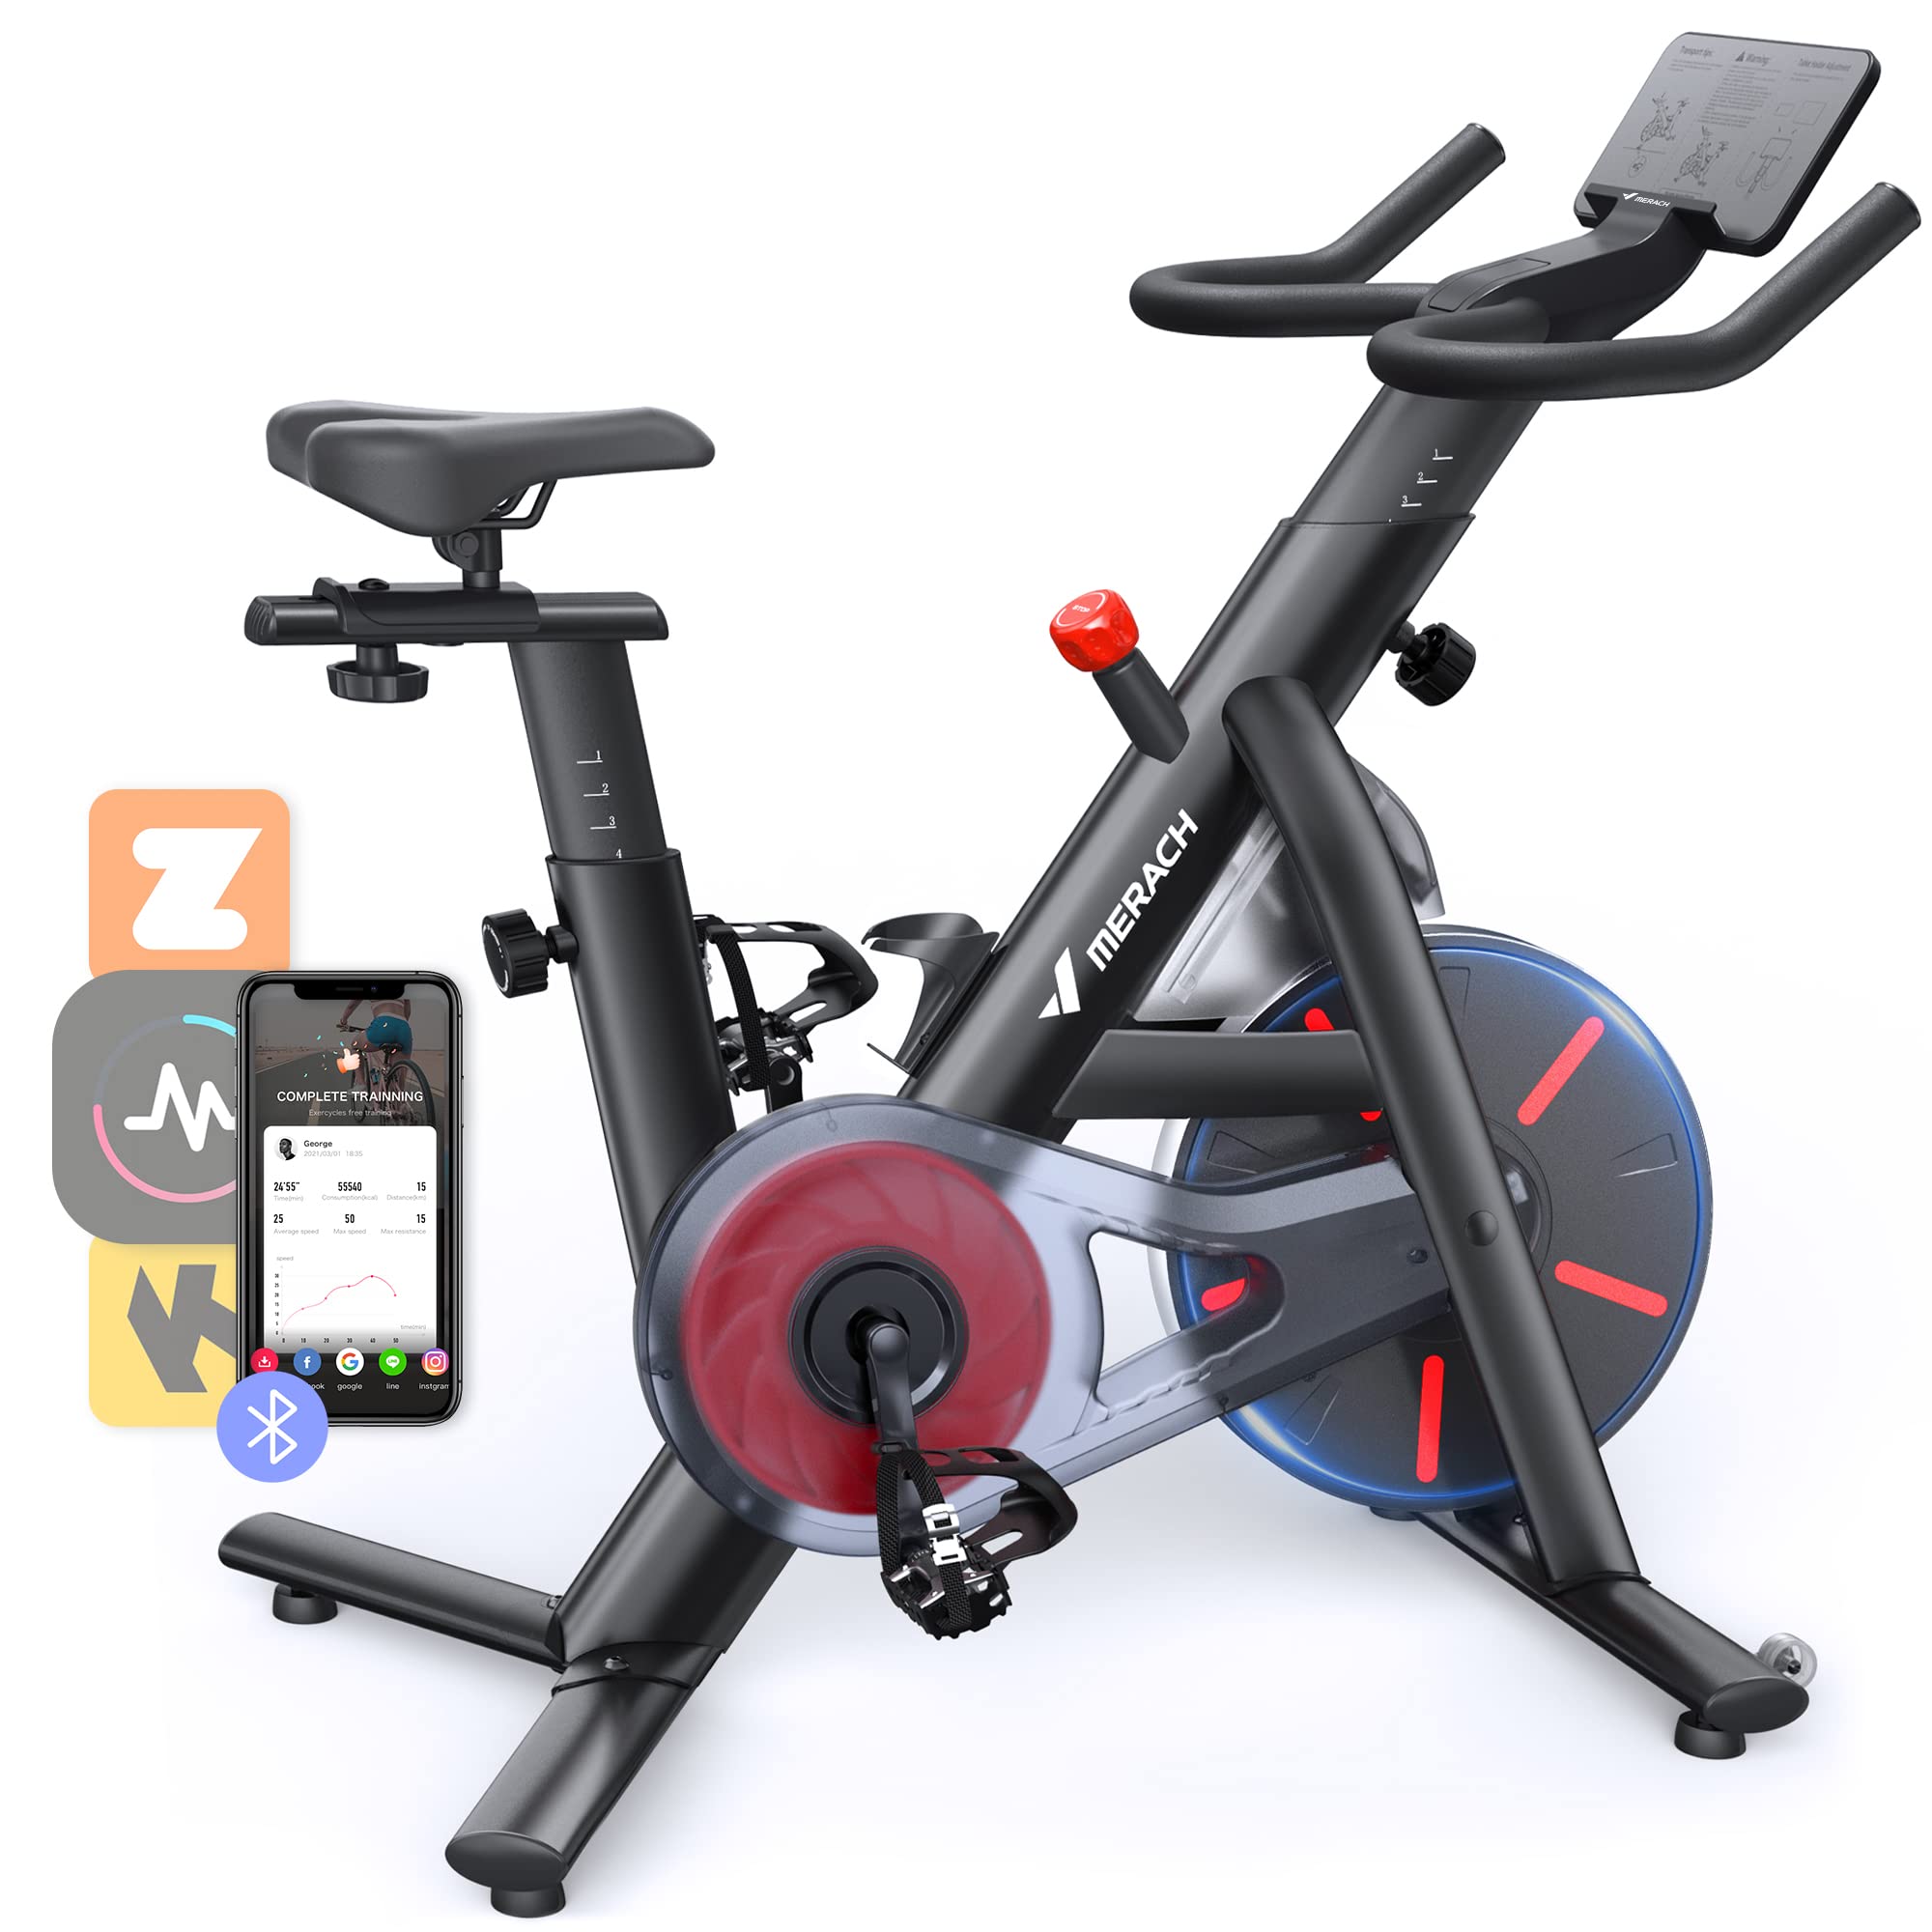 MERACH Exercise Bike, MERAcH Bluetooth Stationary Bike for Home with Magnetic Resistance, Indoor cycling Bike with 350lbs Weight capaci